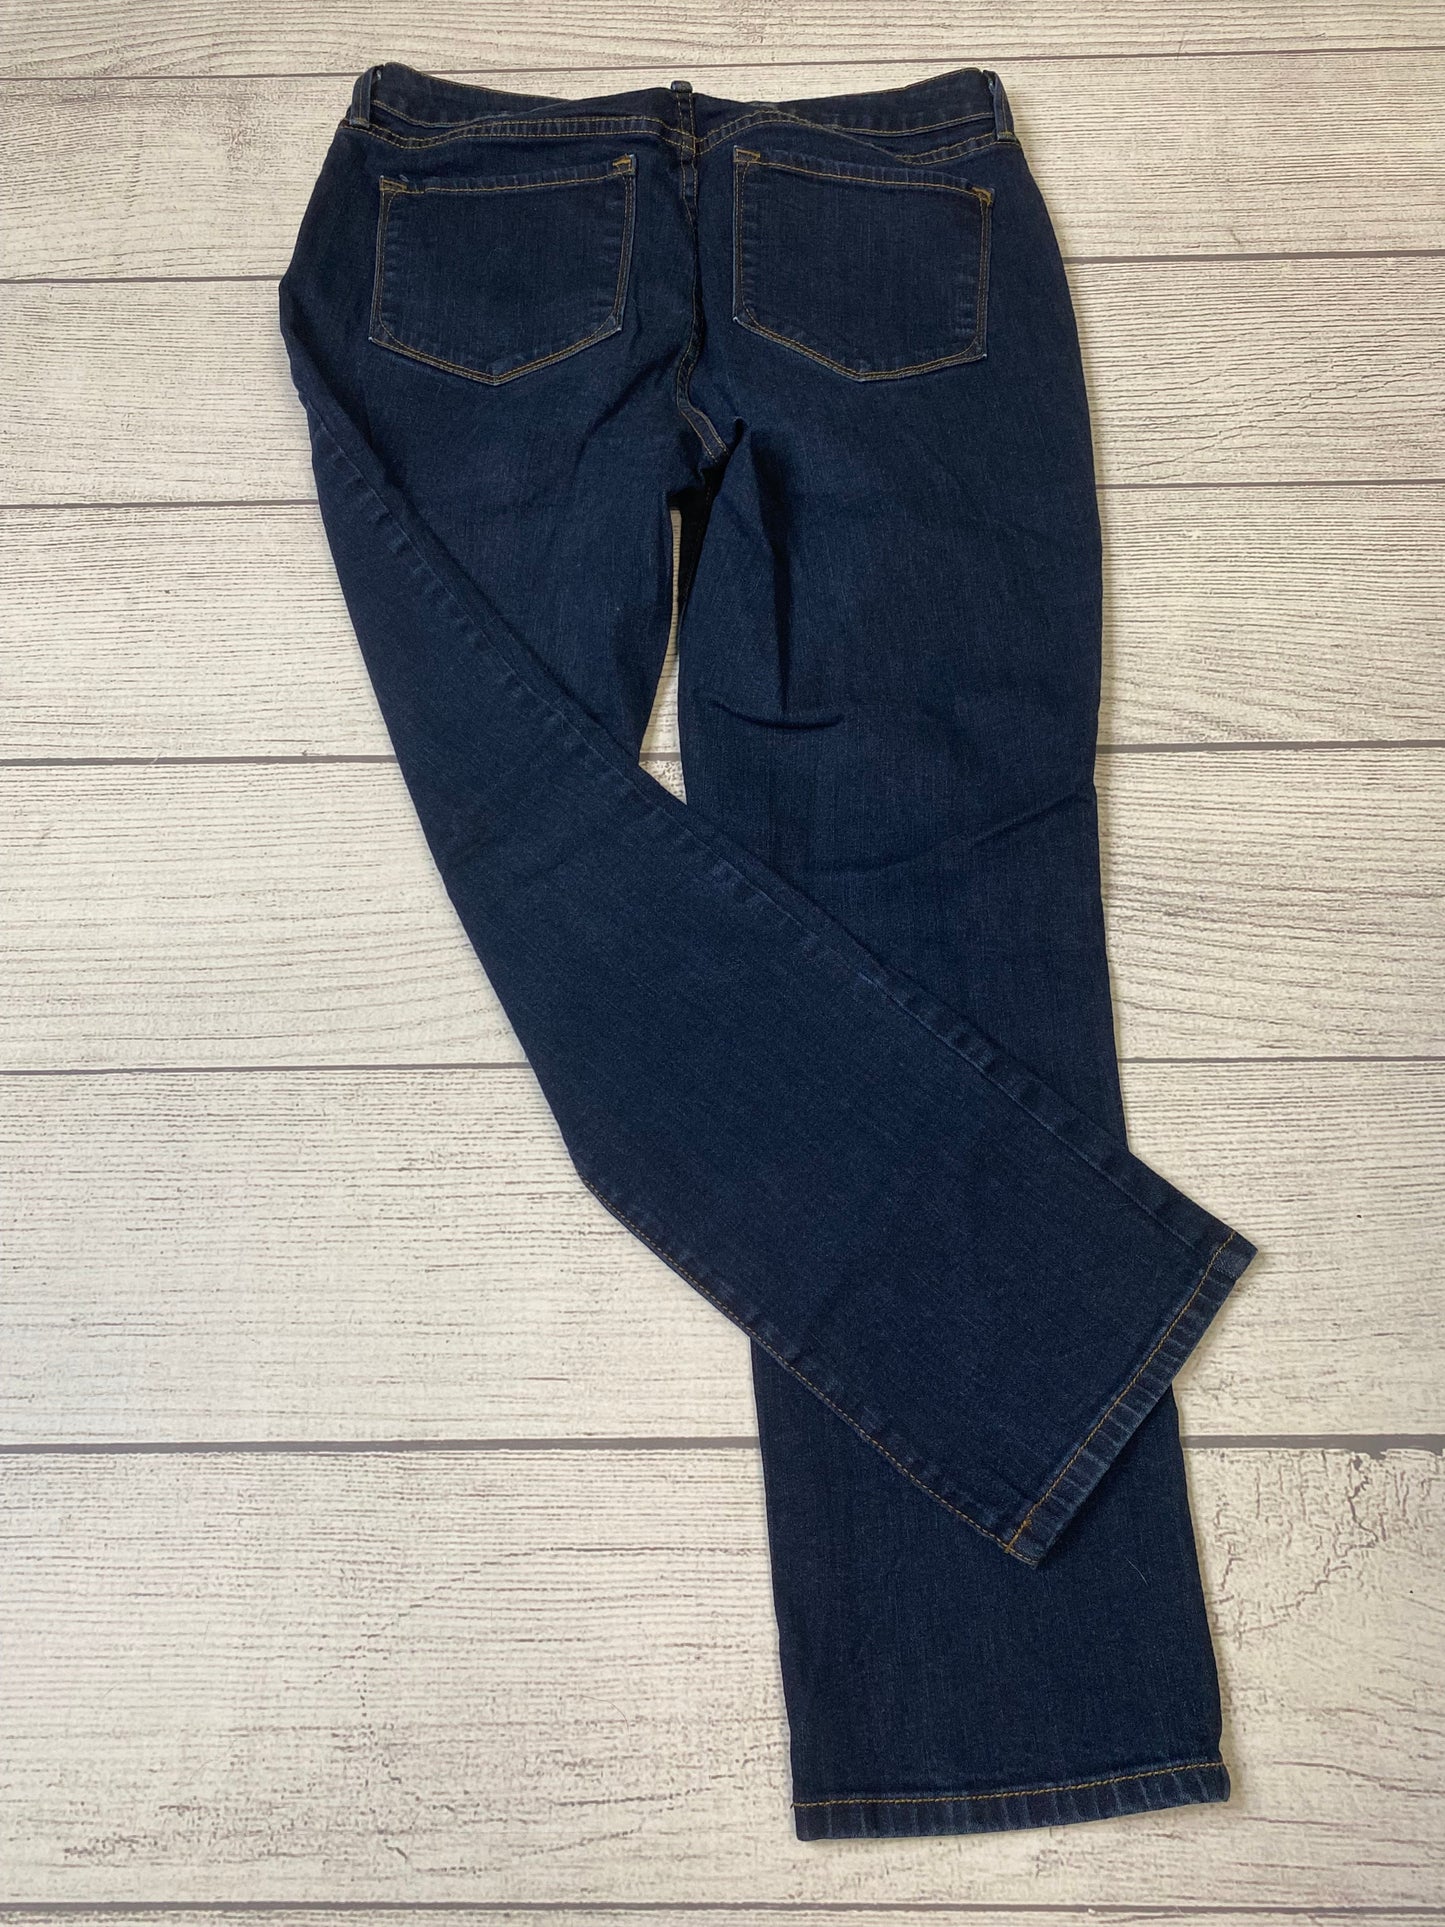 Blue Jeans Designer Not Your Daughters Jeans, Size 10